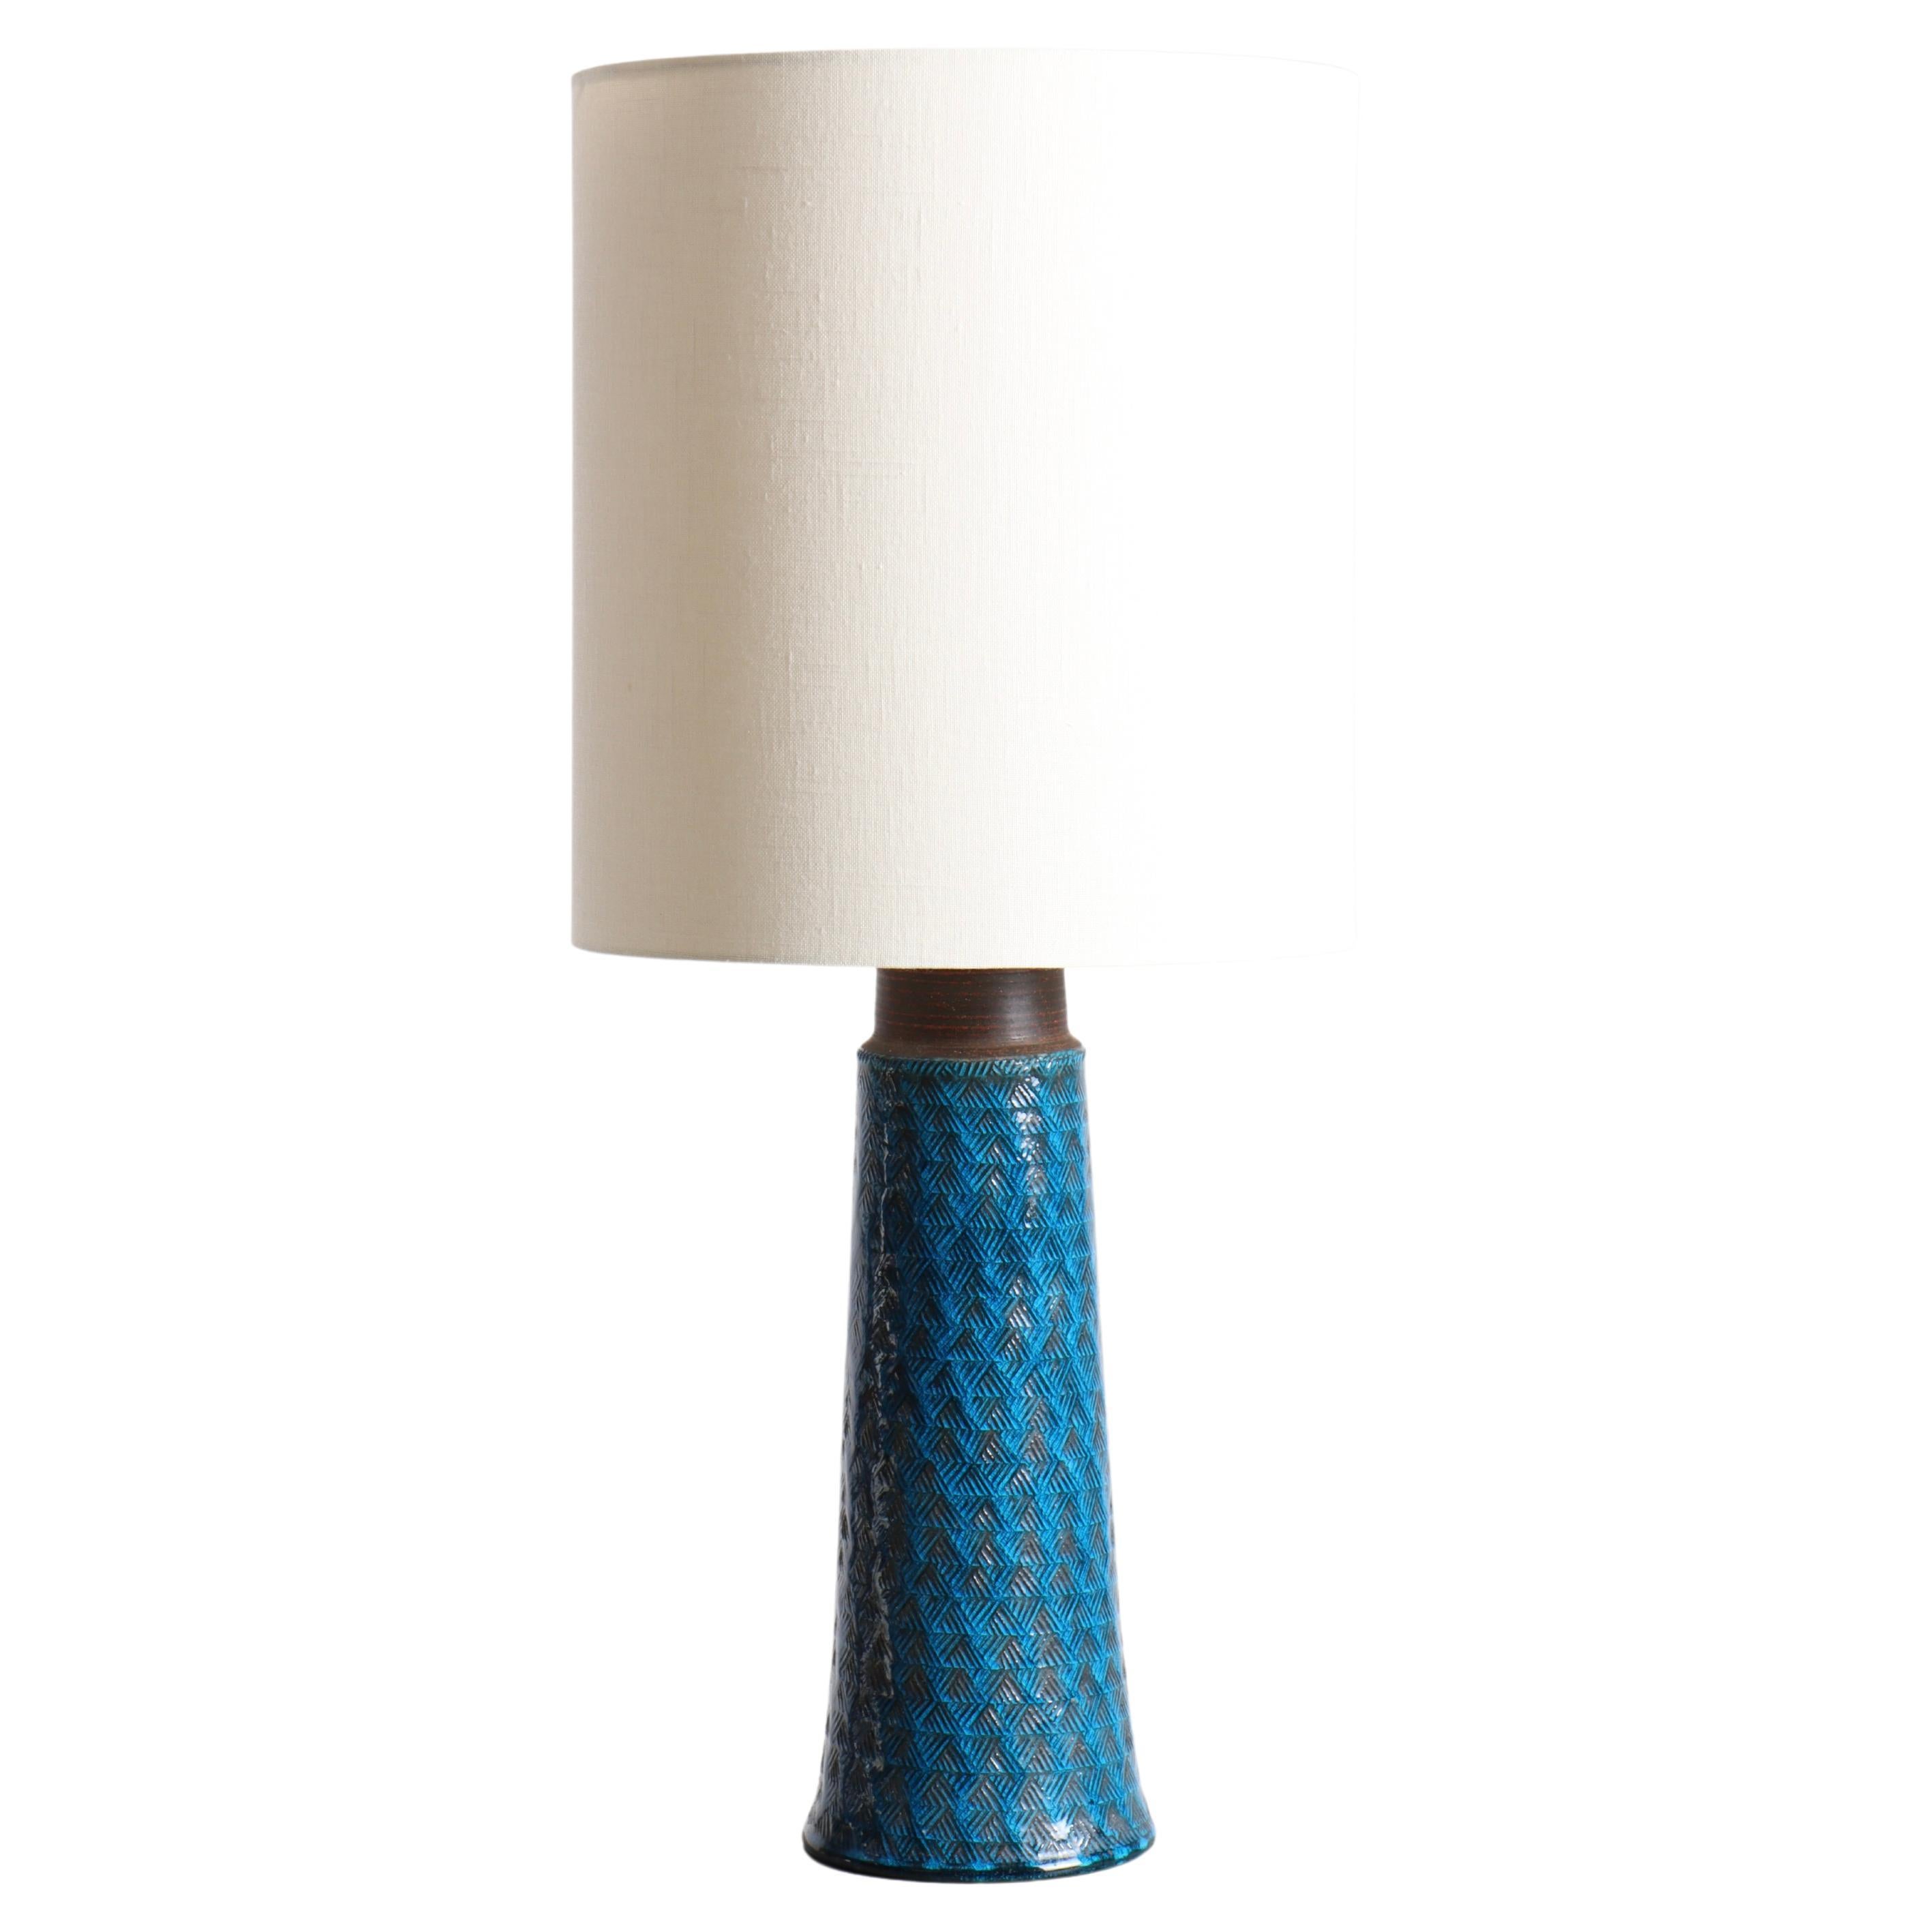 Midcentury Table Lamp by Nils Kähler, Made in Denmark, 1960s For Sale